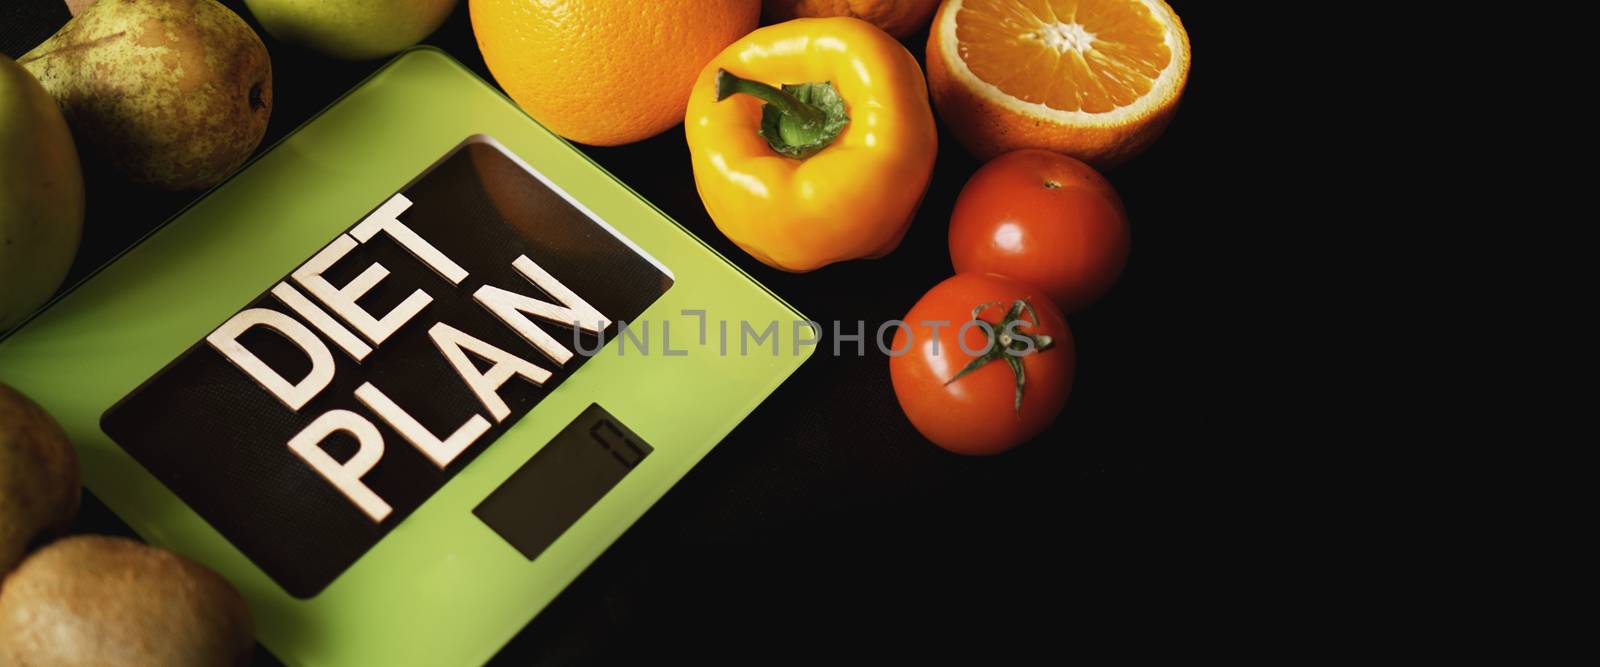 Concept diet. Healthy food, kitchen weight scale. Vegetables and fruits lettering Diet plan on black background